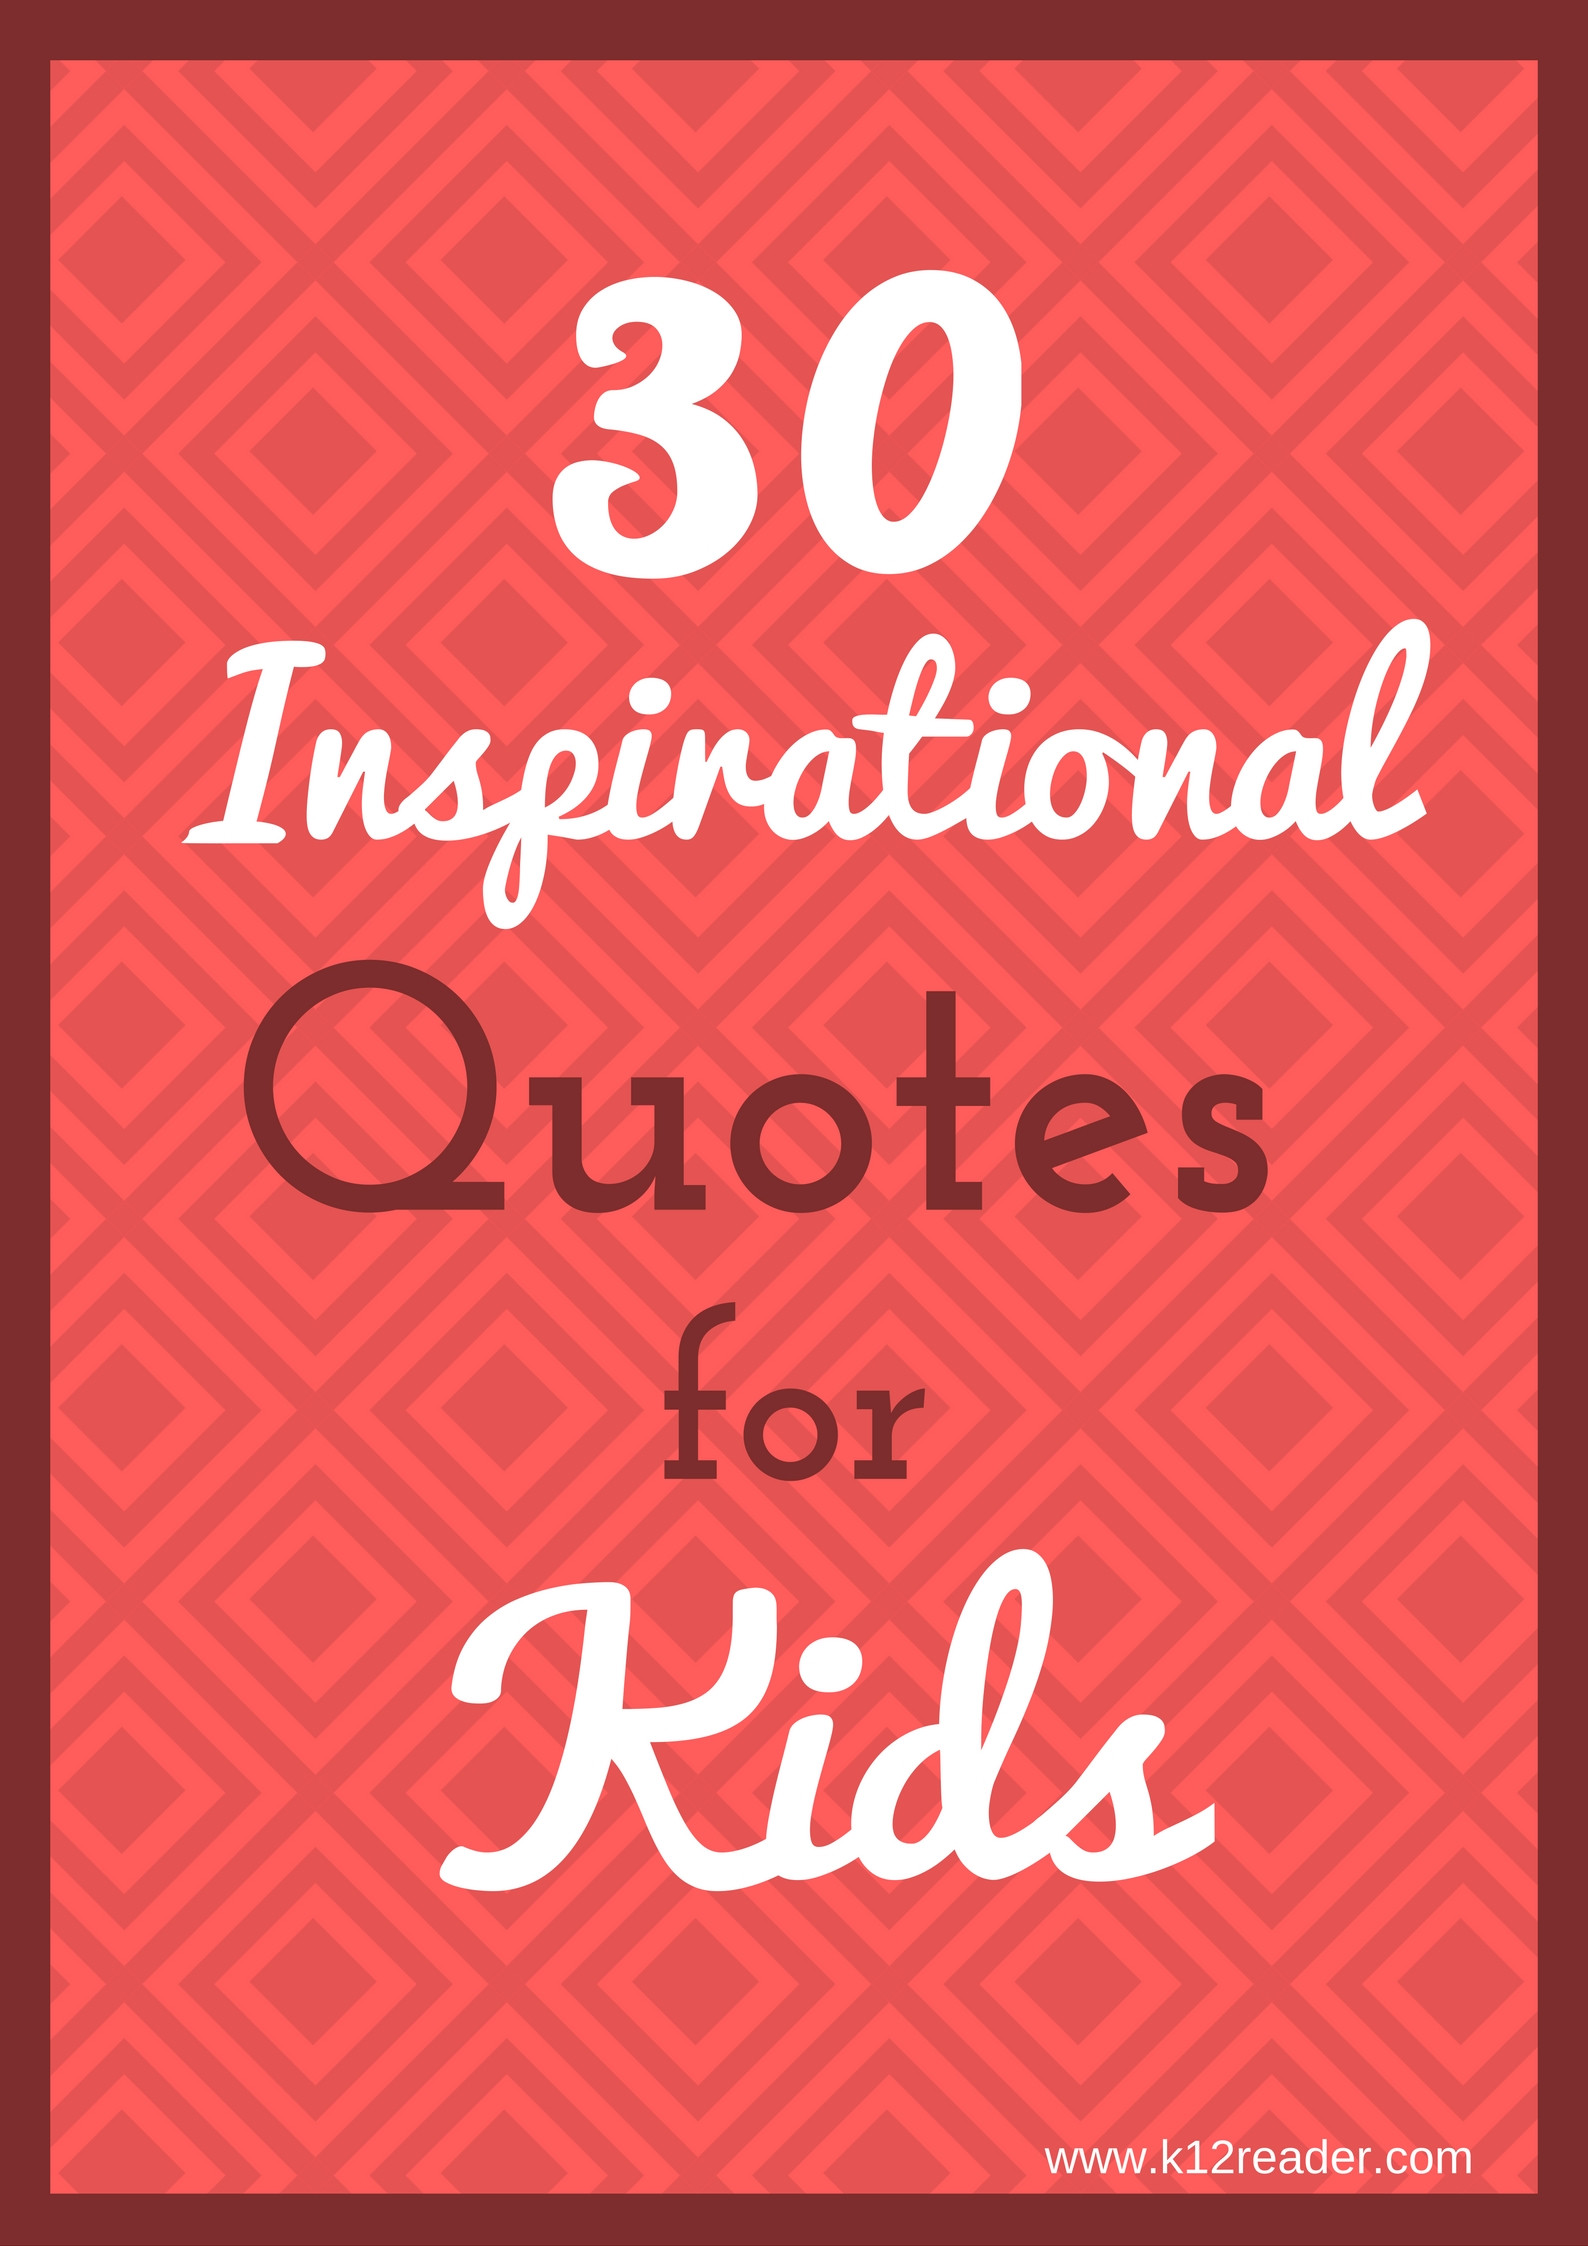 Inspiration Quotes For Children
 30 Inspirational Quotes for Kids